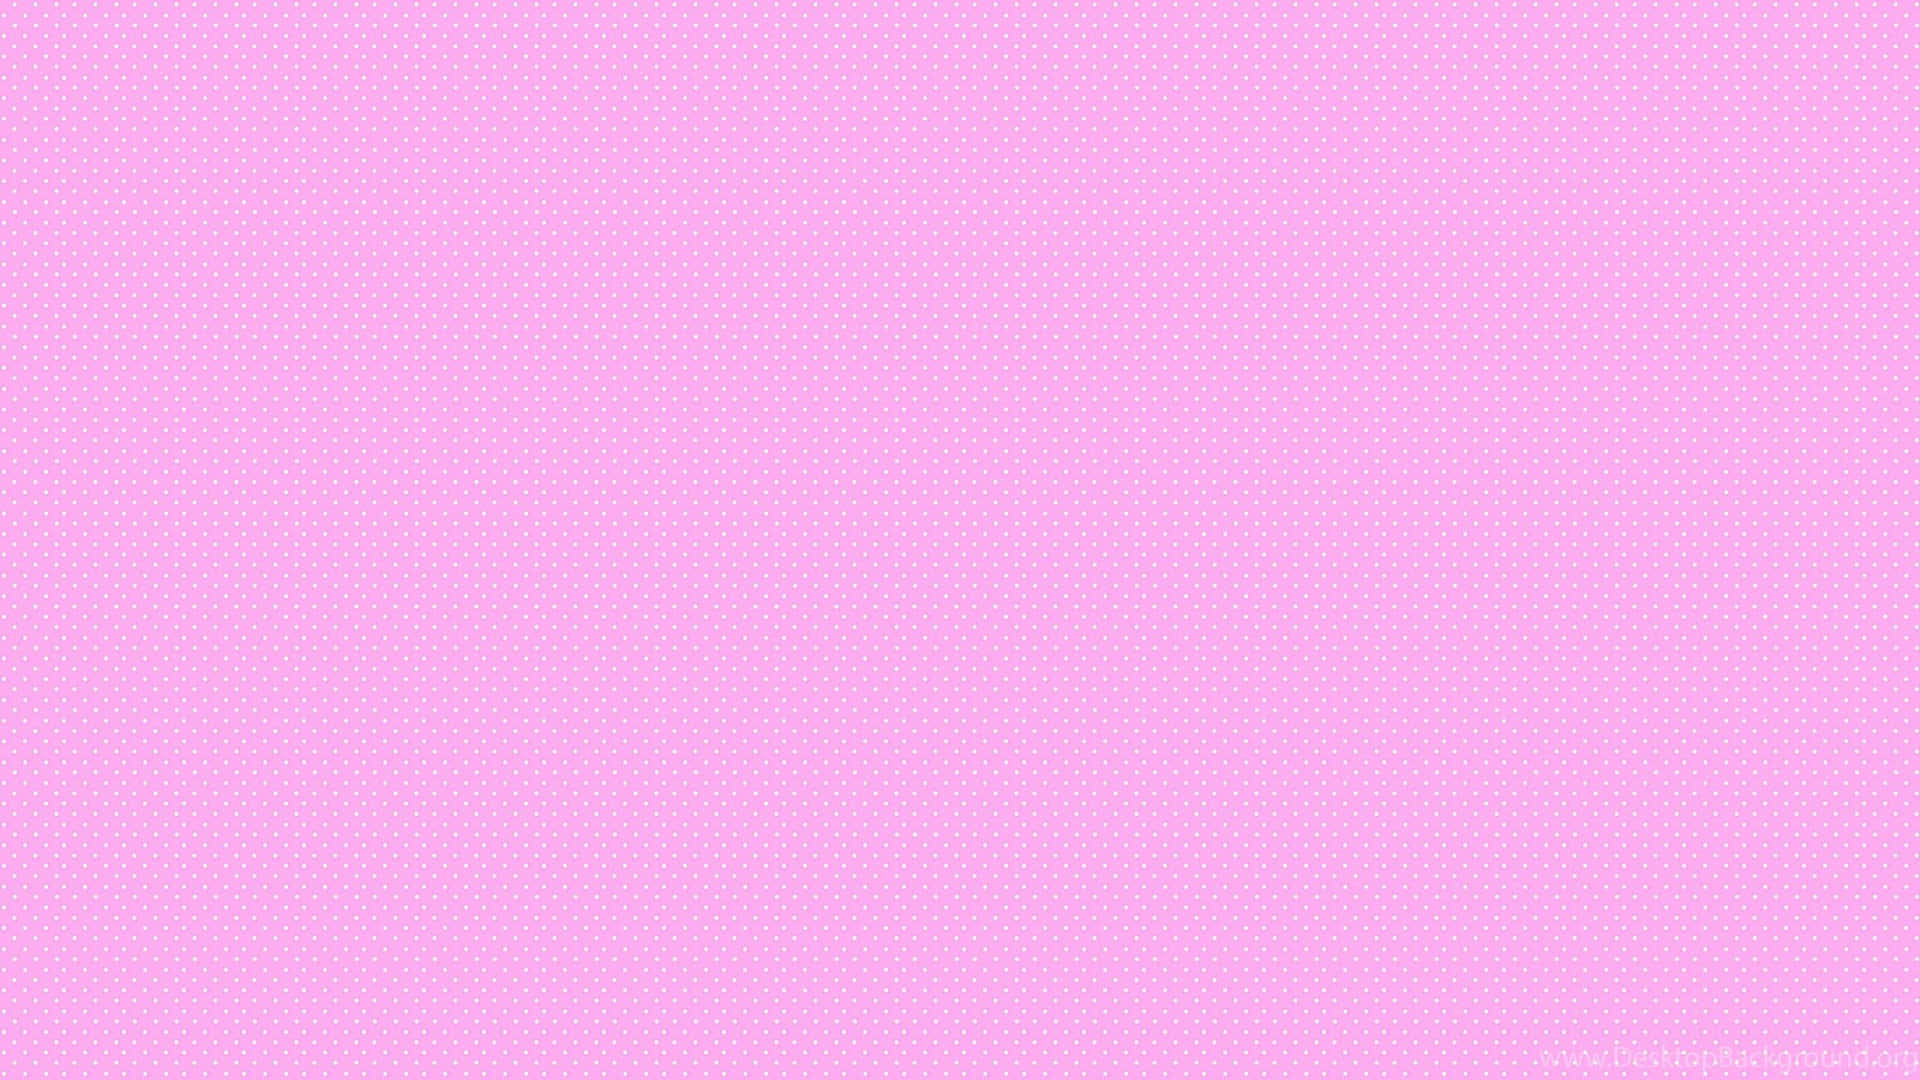 A tranquil background featuring a light pink gradient. Wallpaper